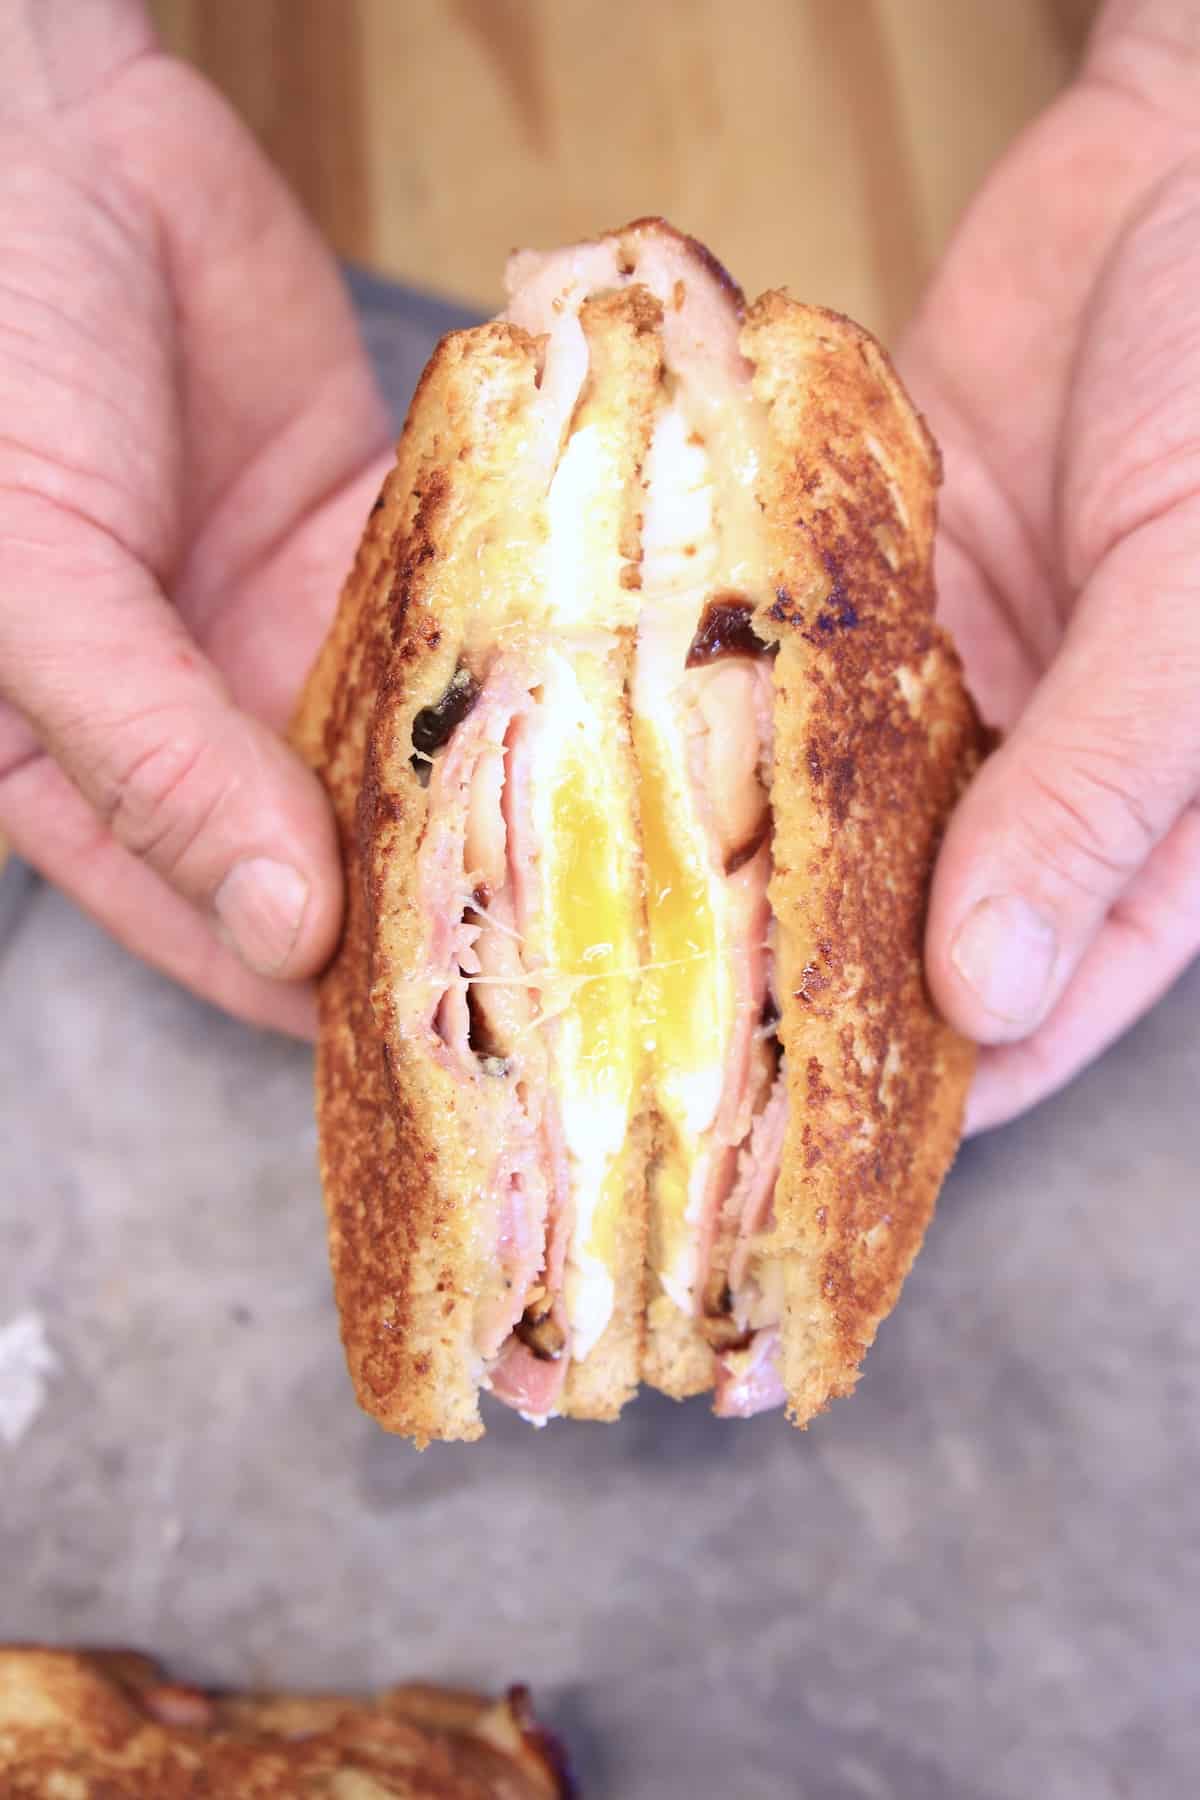 Hot ham, egg and cheese sandwich, cut in half, held in hands.